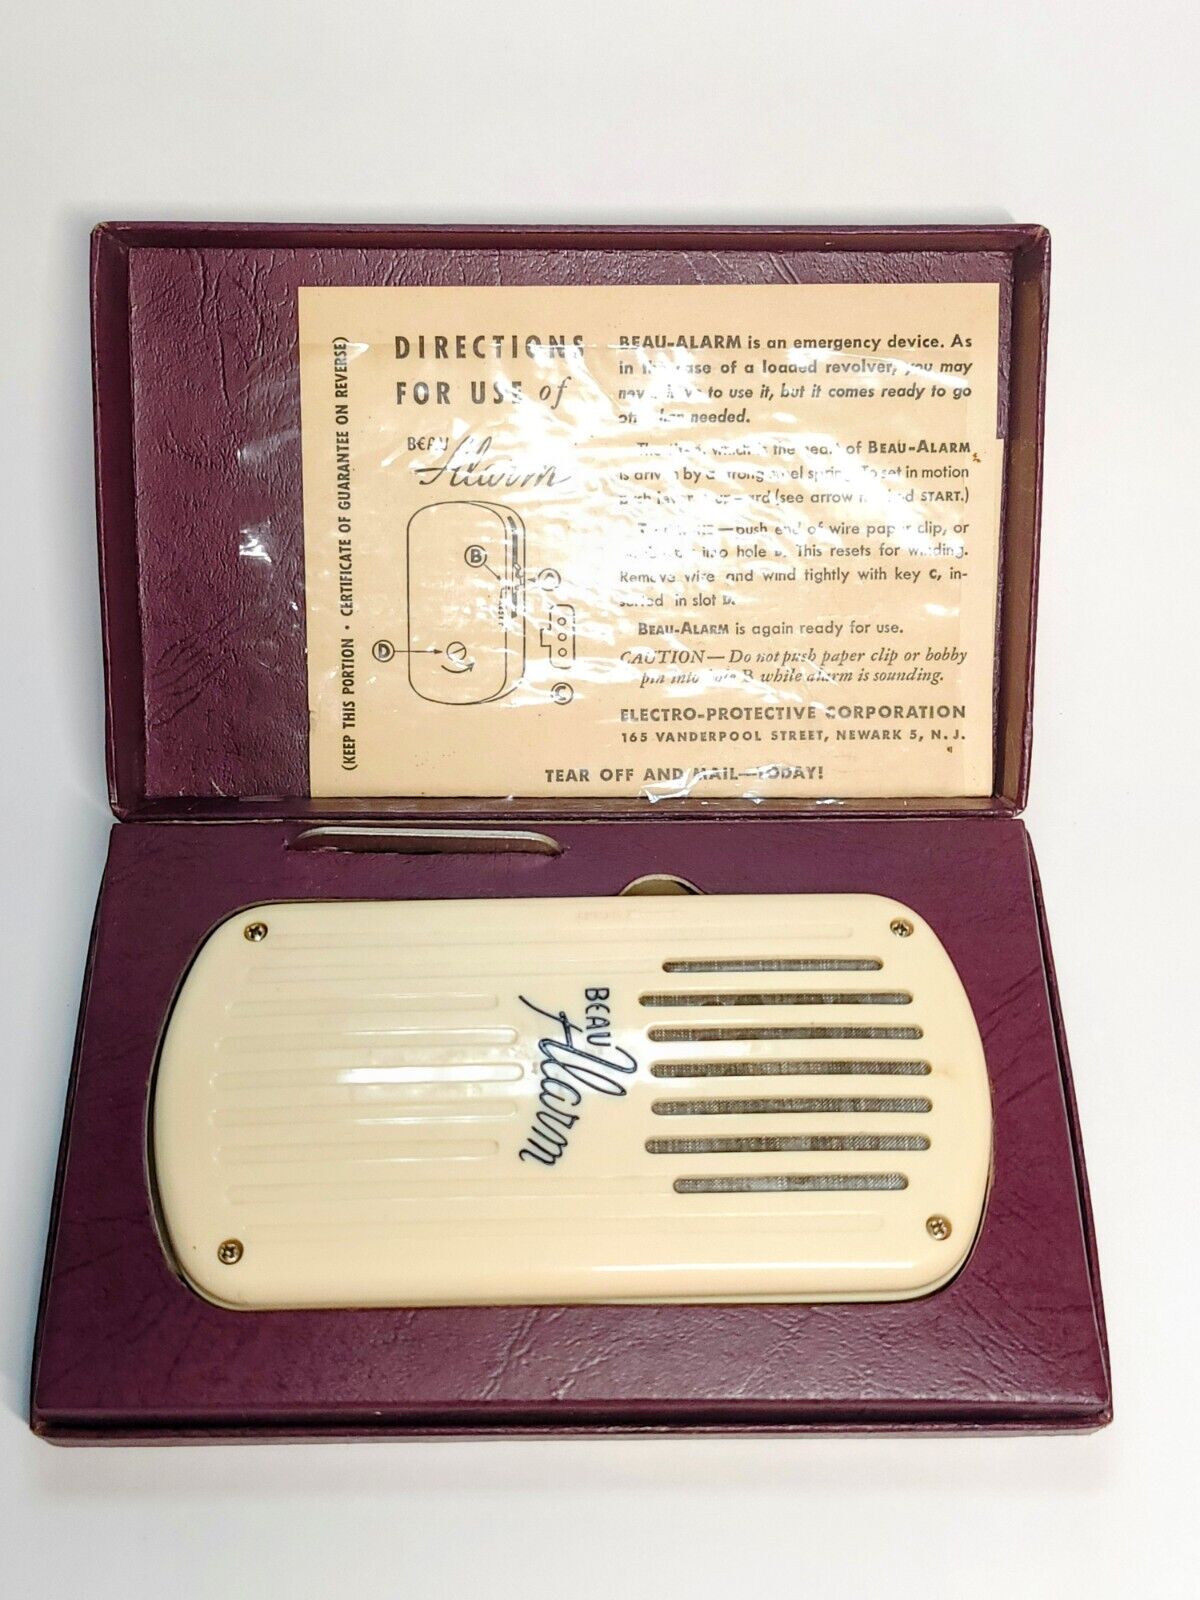 Beau Alarm comes with Box and Instructions Vintage Alarm 